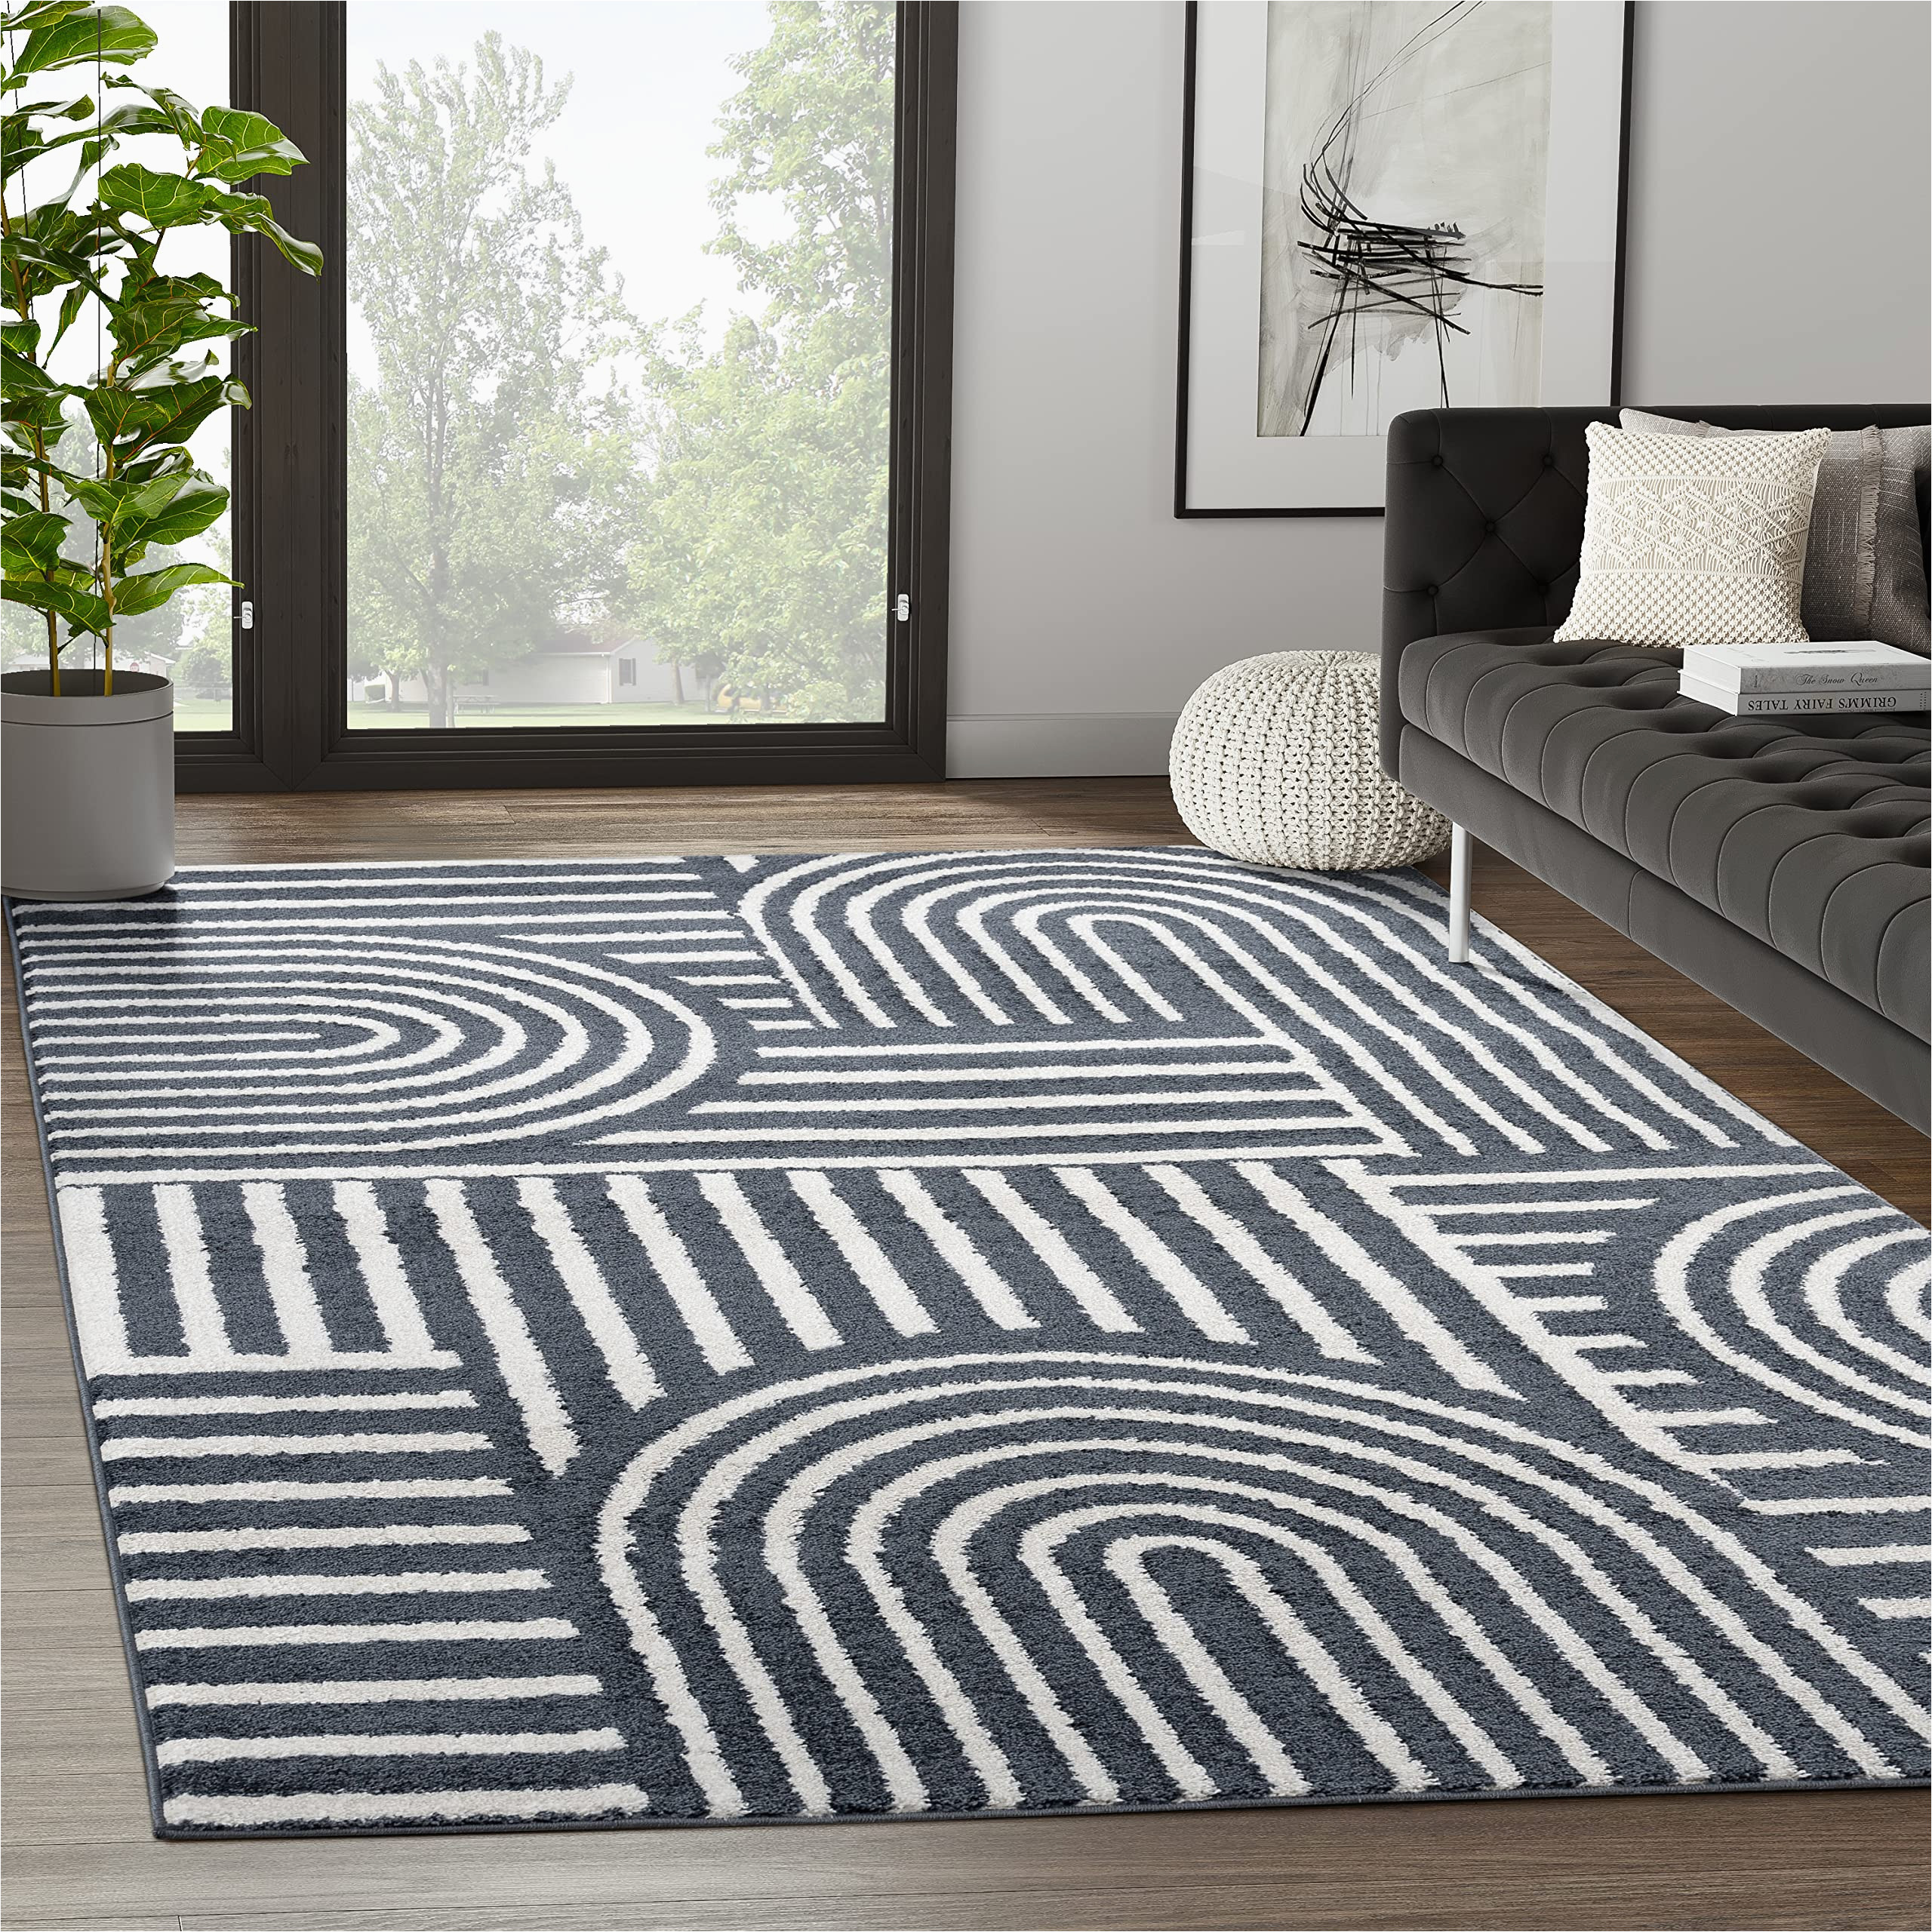 Mid Century Modern Style area Rugs Abani Contemporary Mid-century Design 4′ X 6′ area Rug Rugs – Modern Non-shed Arches Print Cream & Black Bedroom Rug